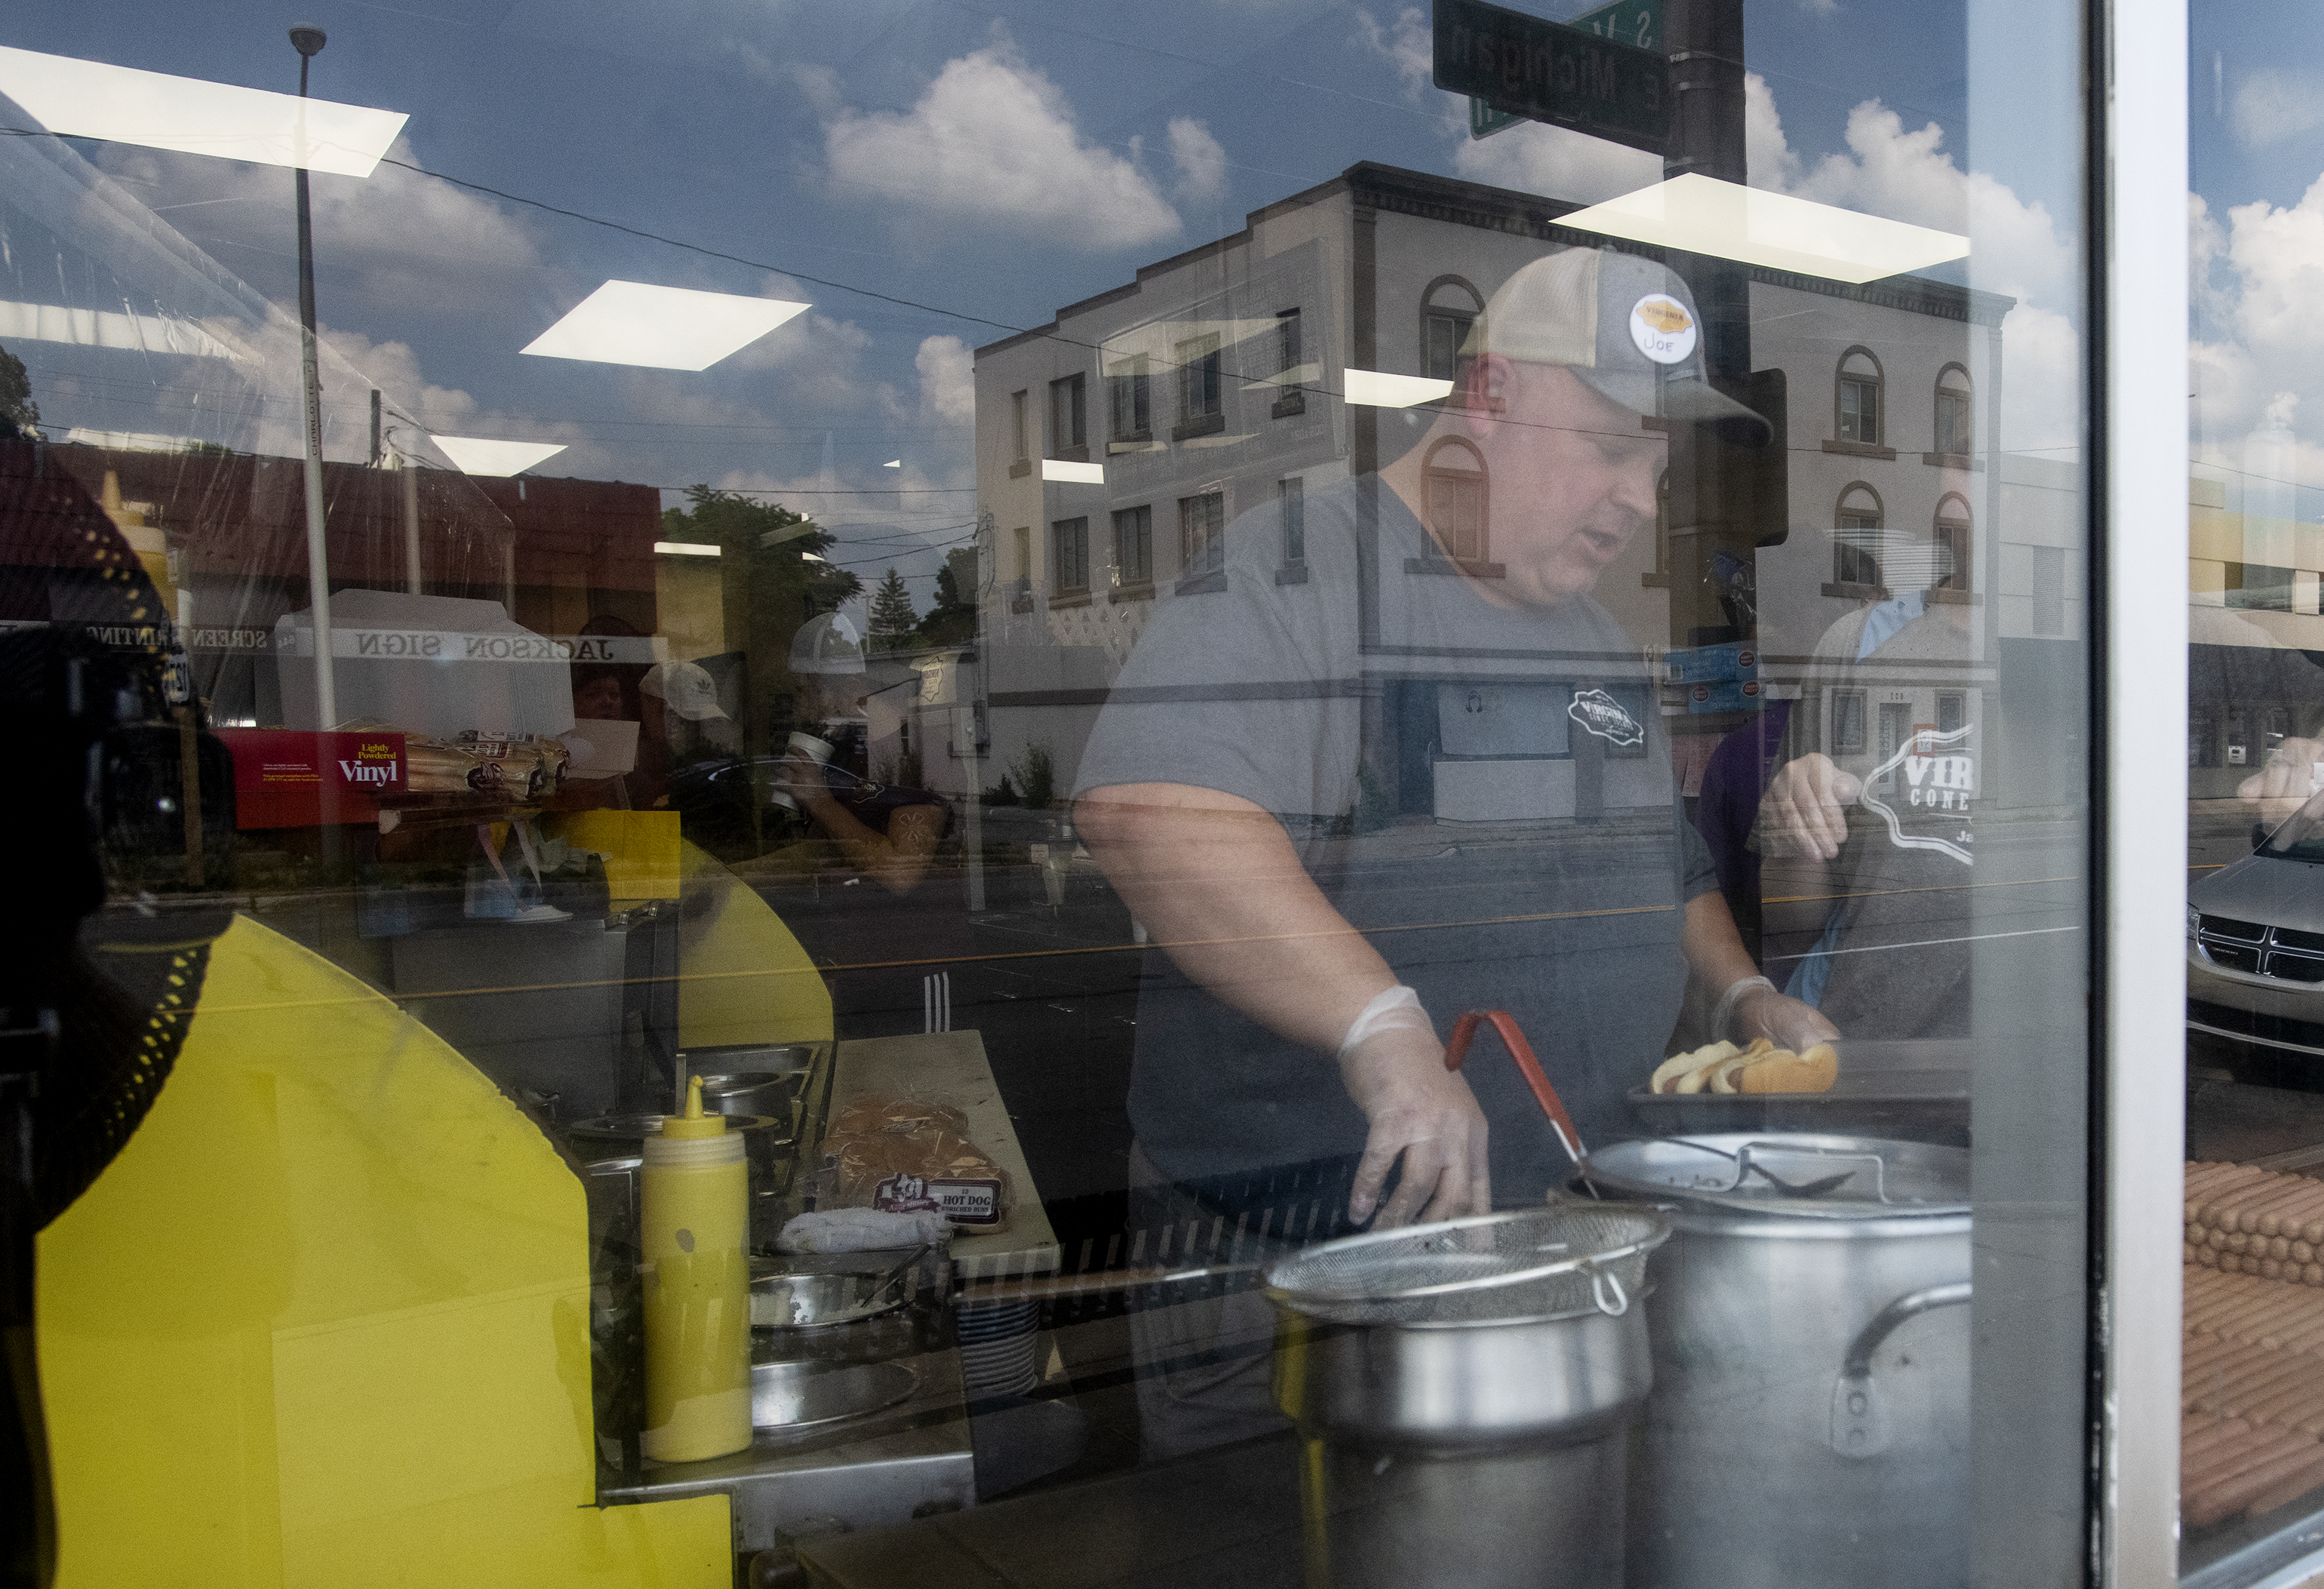 Co-owner Joe Matthews works in the kitchen at Virginia Coney Island, 649 E. Michigan Ave., on Monday, July 6, 2020. The restaurant has been serving the Jackson community since 1914.